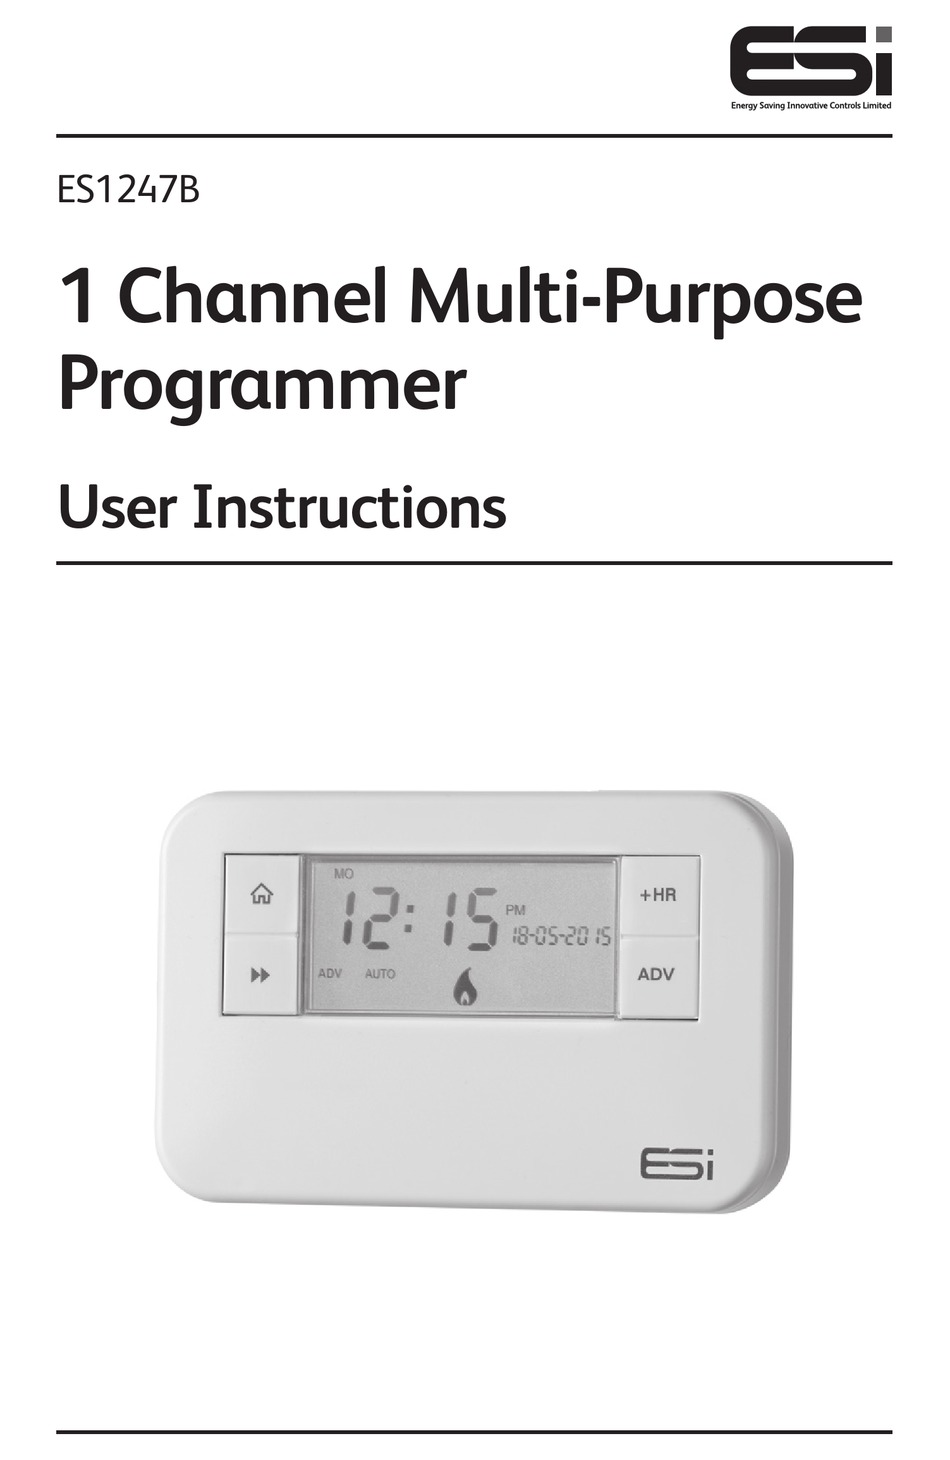 ESI SINGLE 1 CHANNEL PROGRAMMER 7 DAY 5/2 OR 24 HOUR HEATING TIMER SWITCH ES1247 